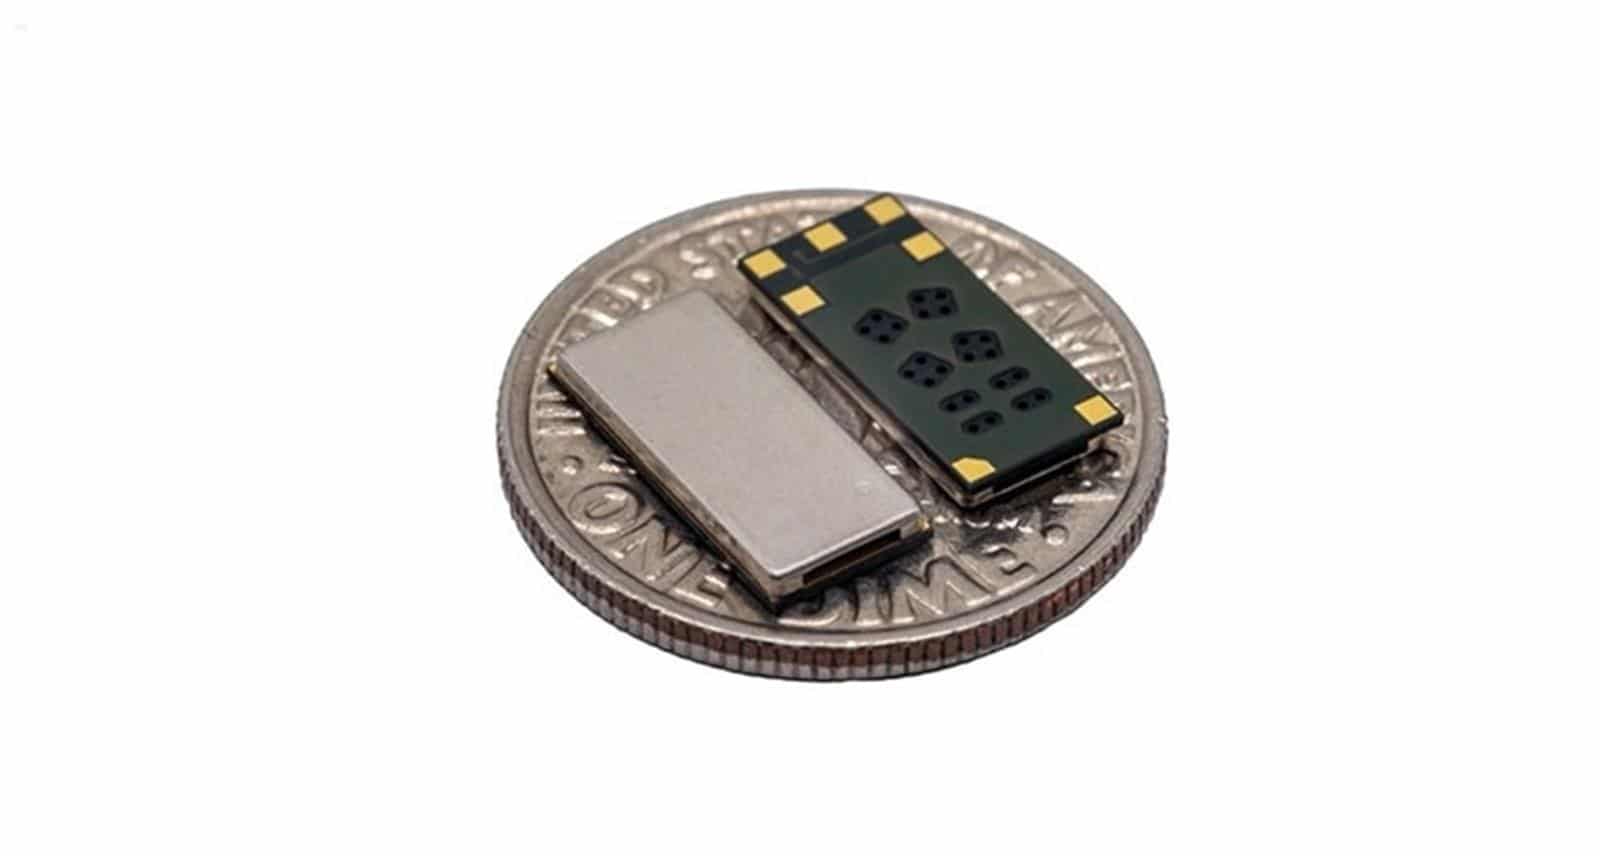 The first such unique MEMS micro-speaker.  This is Montara Pro from xMEMS Labs